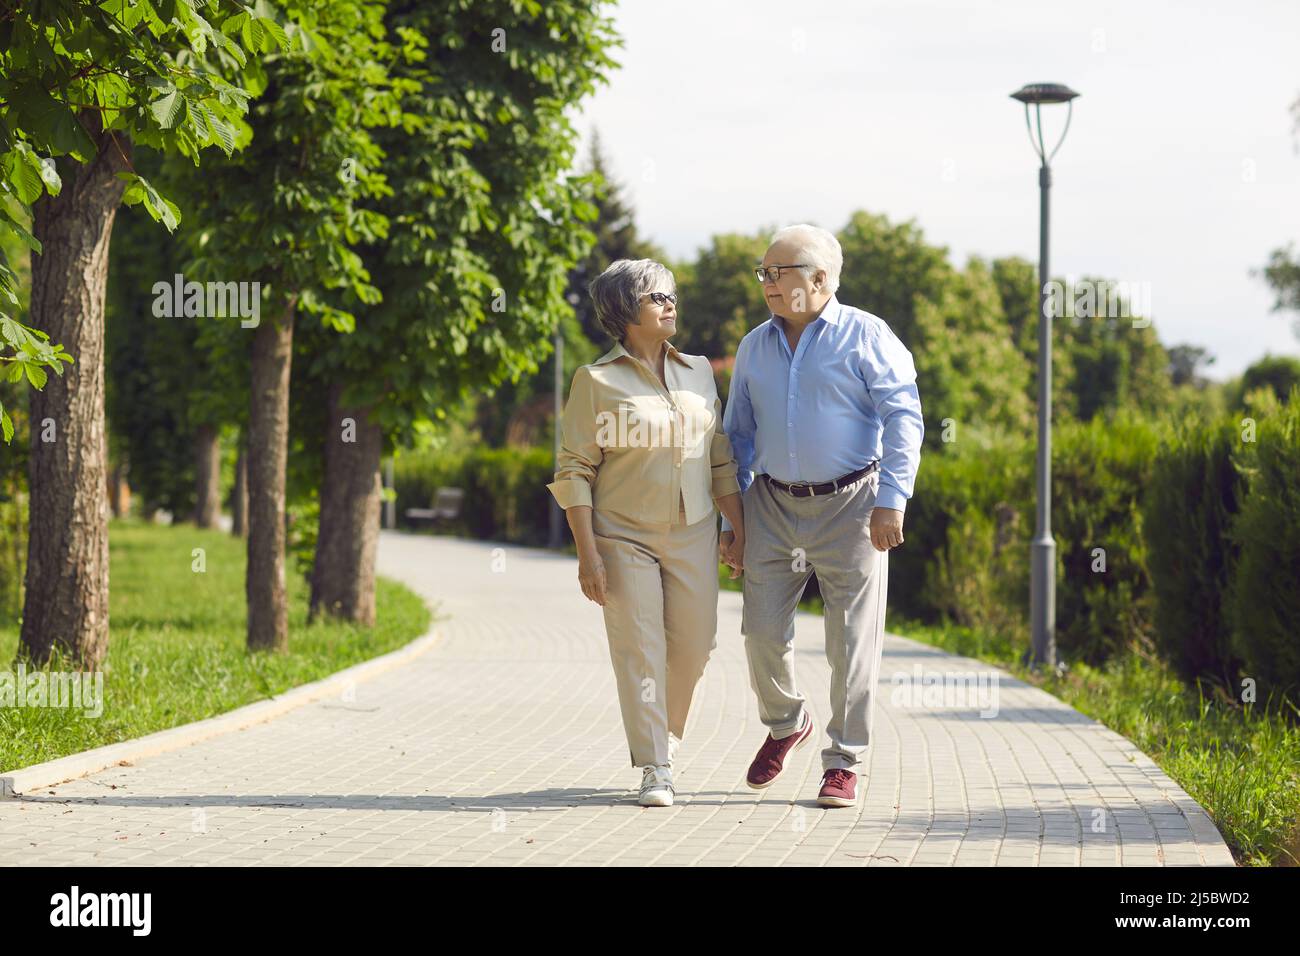 Cheerful senior couple having a good time in a city park walking, laughing and enjoying a sunny day. Stock Photo